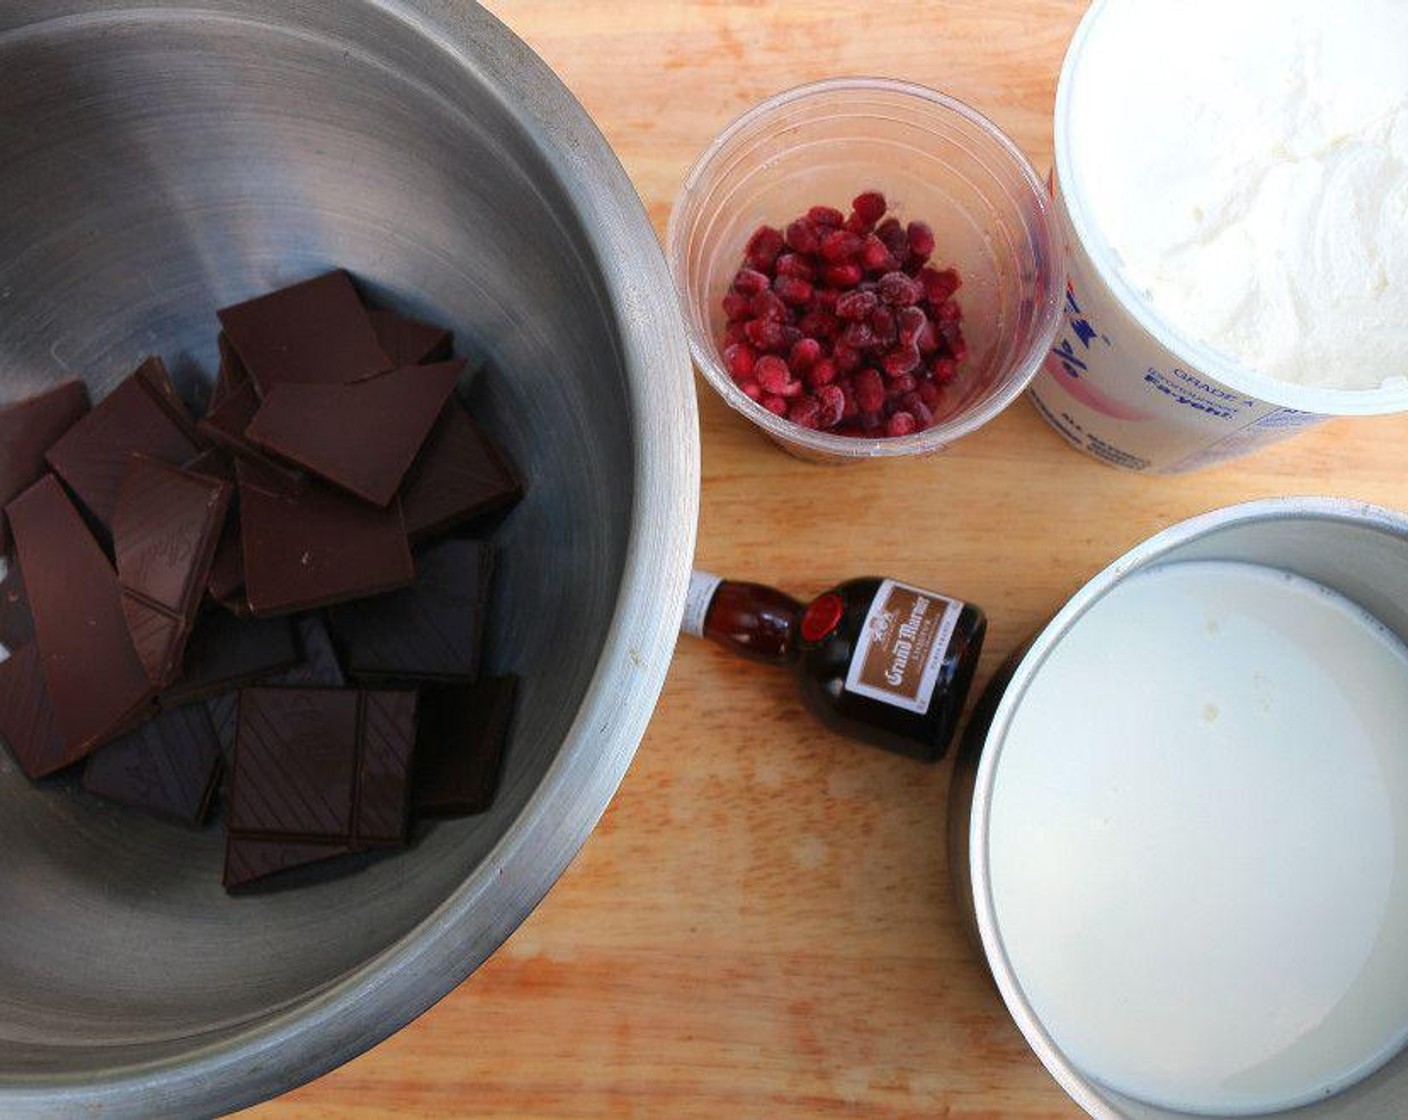 step 1 Place the 70% Dark Chocolate (1 cup) into a medium heatproof bowl. In a small heavy-bottomed saucepan, bring the Whole Milk (1/2 cup) just to a boil over medium heat.